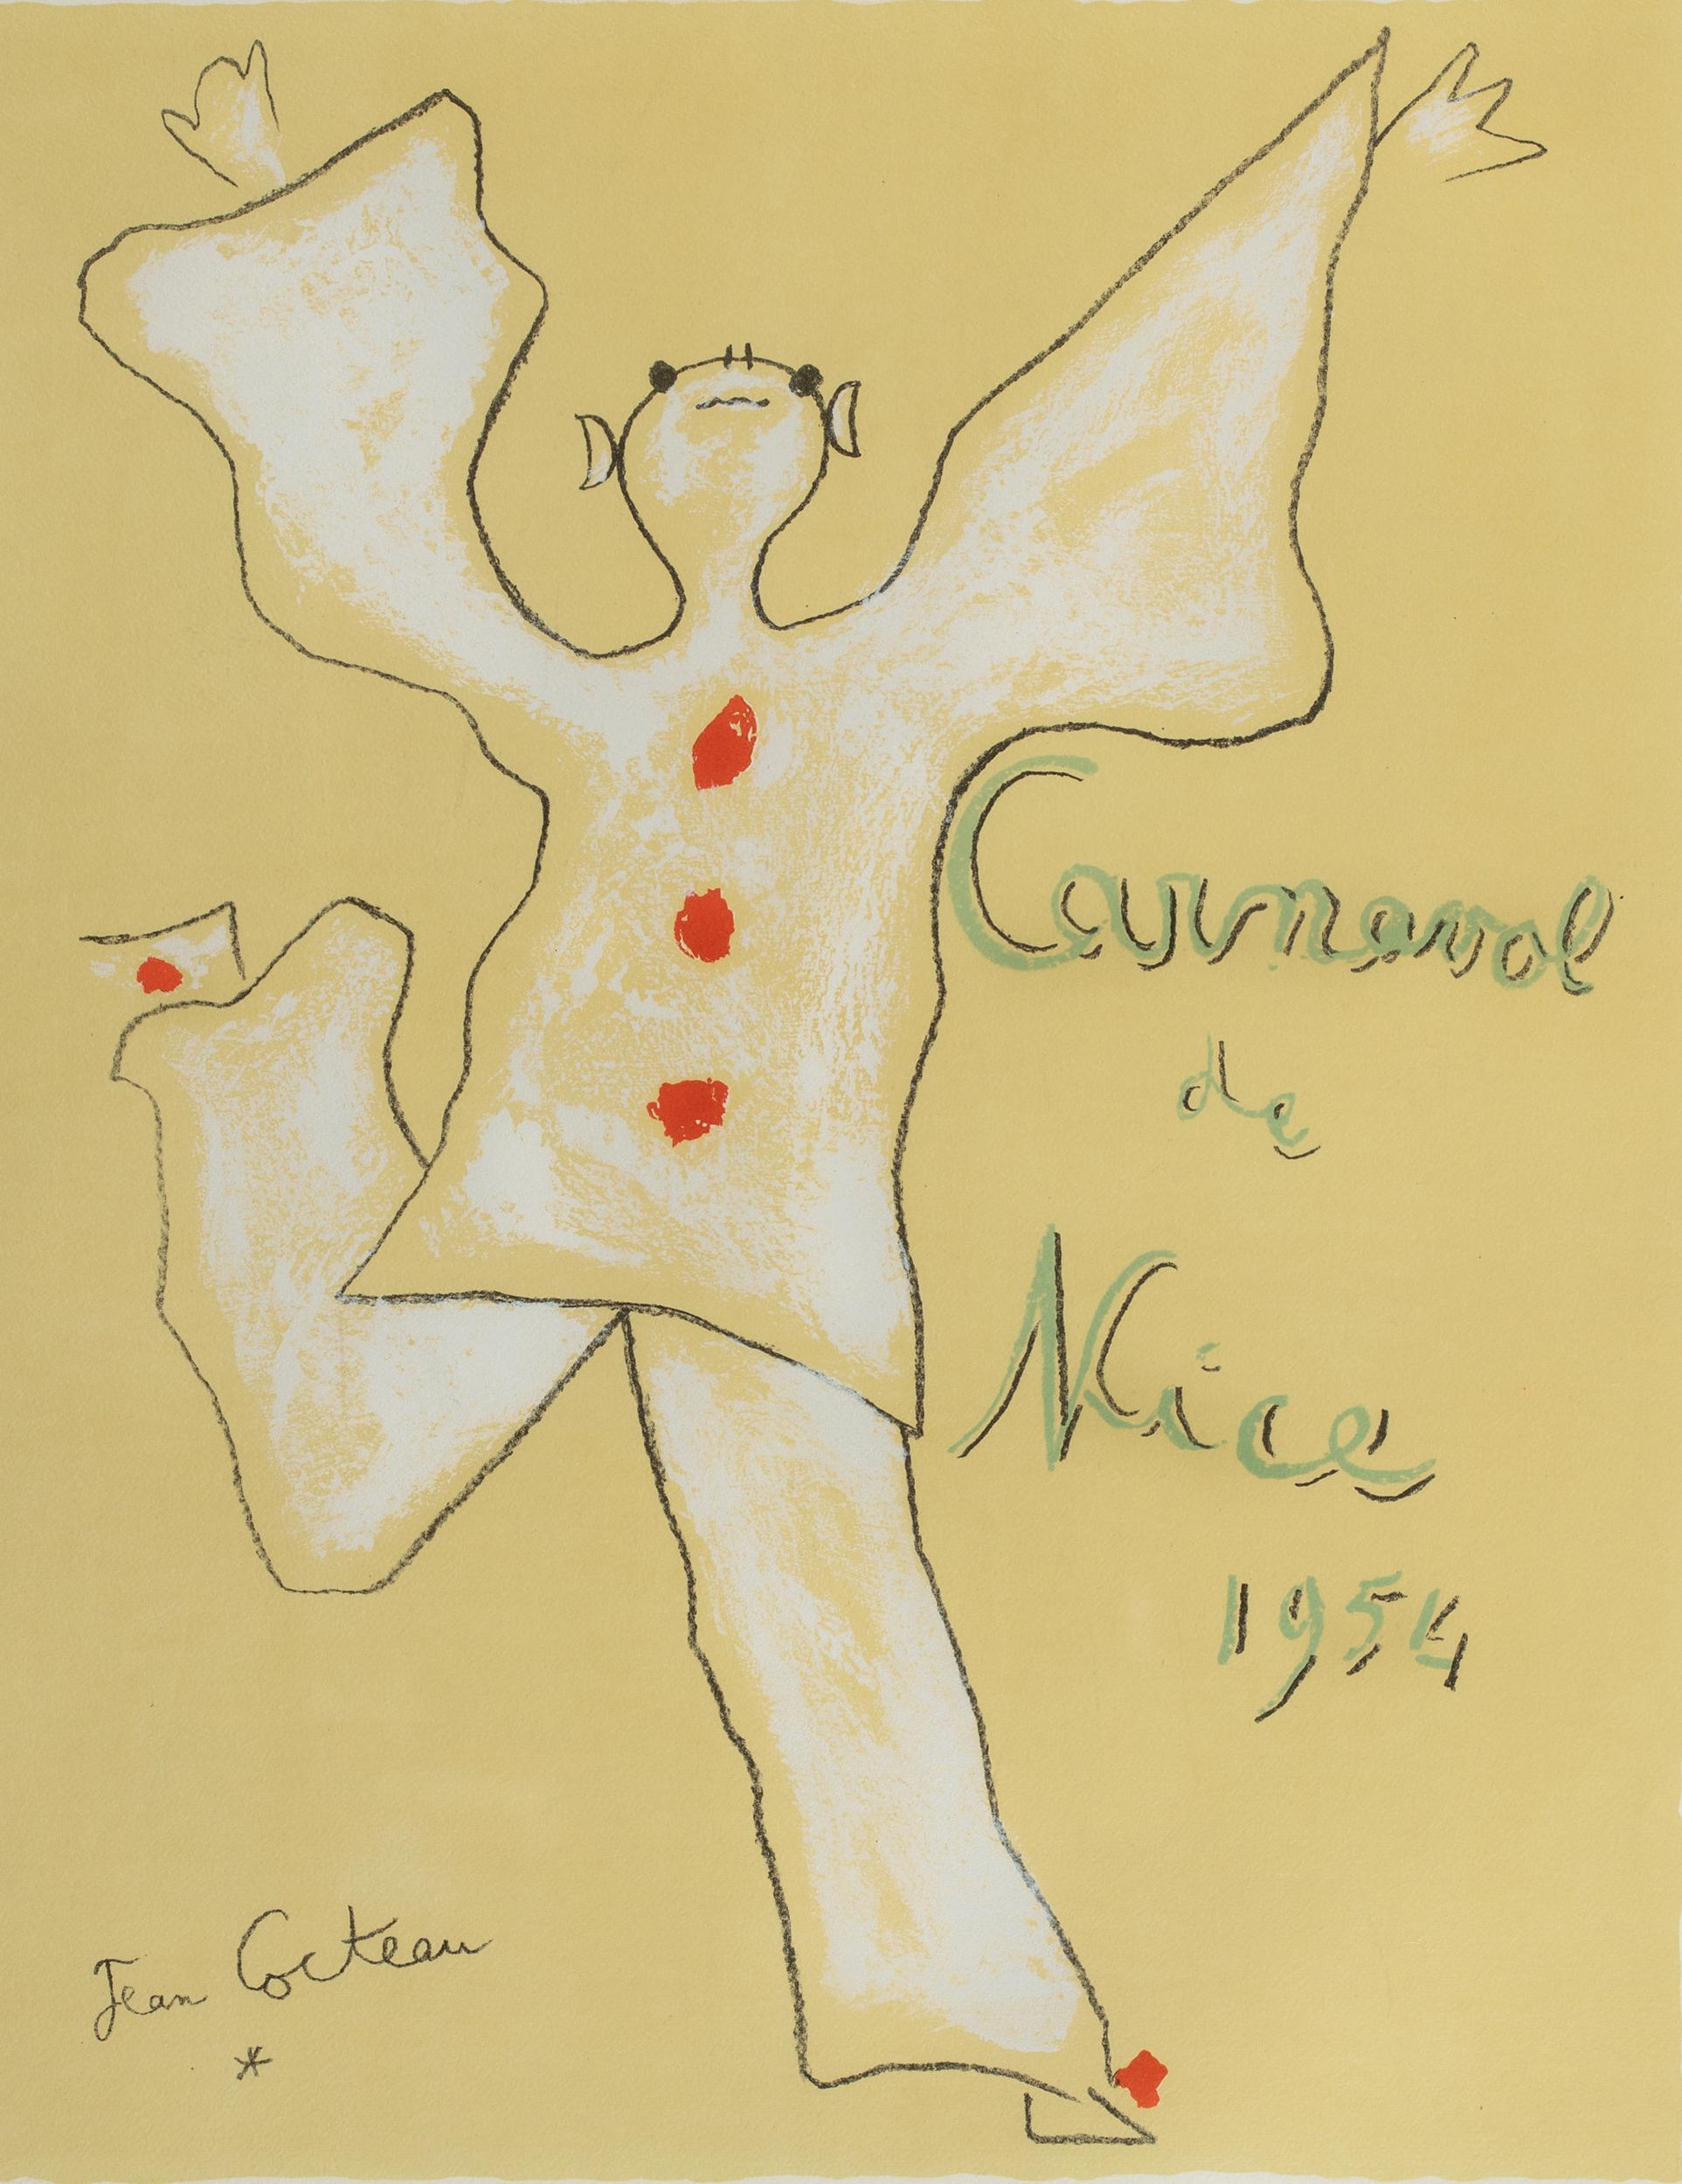 A joyous harlequin, with their arms stretched upwards and their face towards the sky, leaps into the center of the composition. This lithograph was created by Jean Cocteau to celebrate Carnaval in Nice, France in 1952. The work is signed in pencil